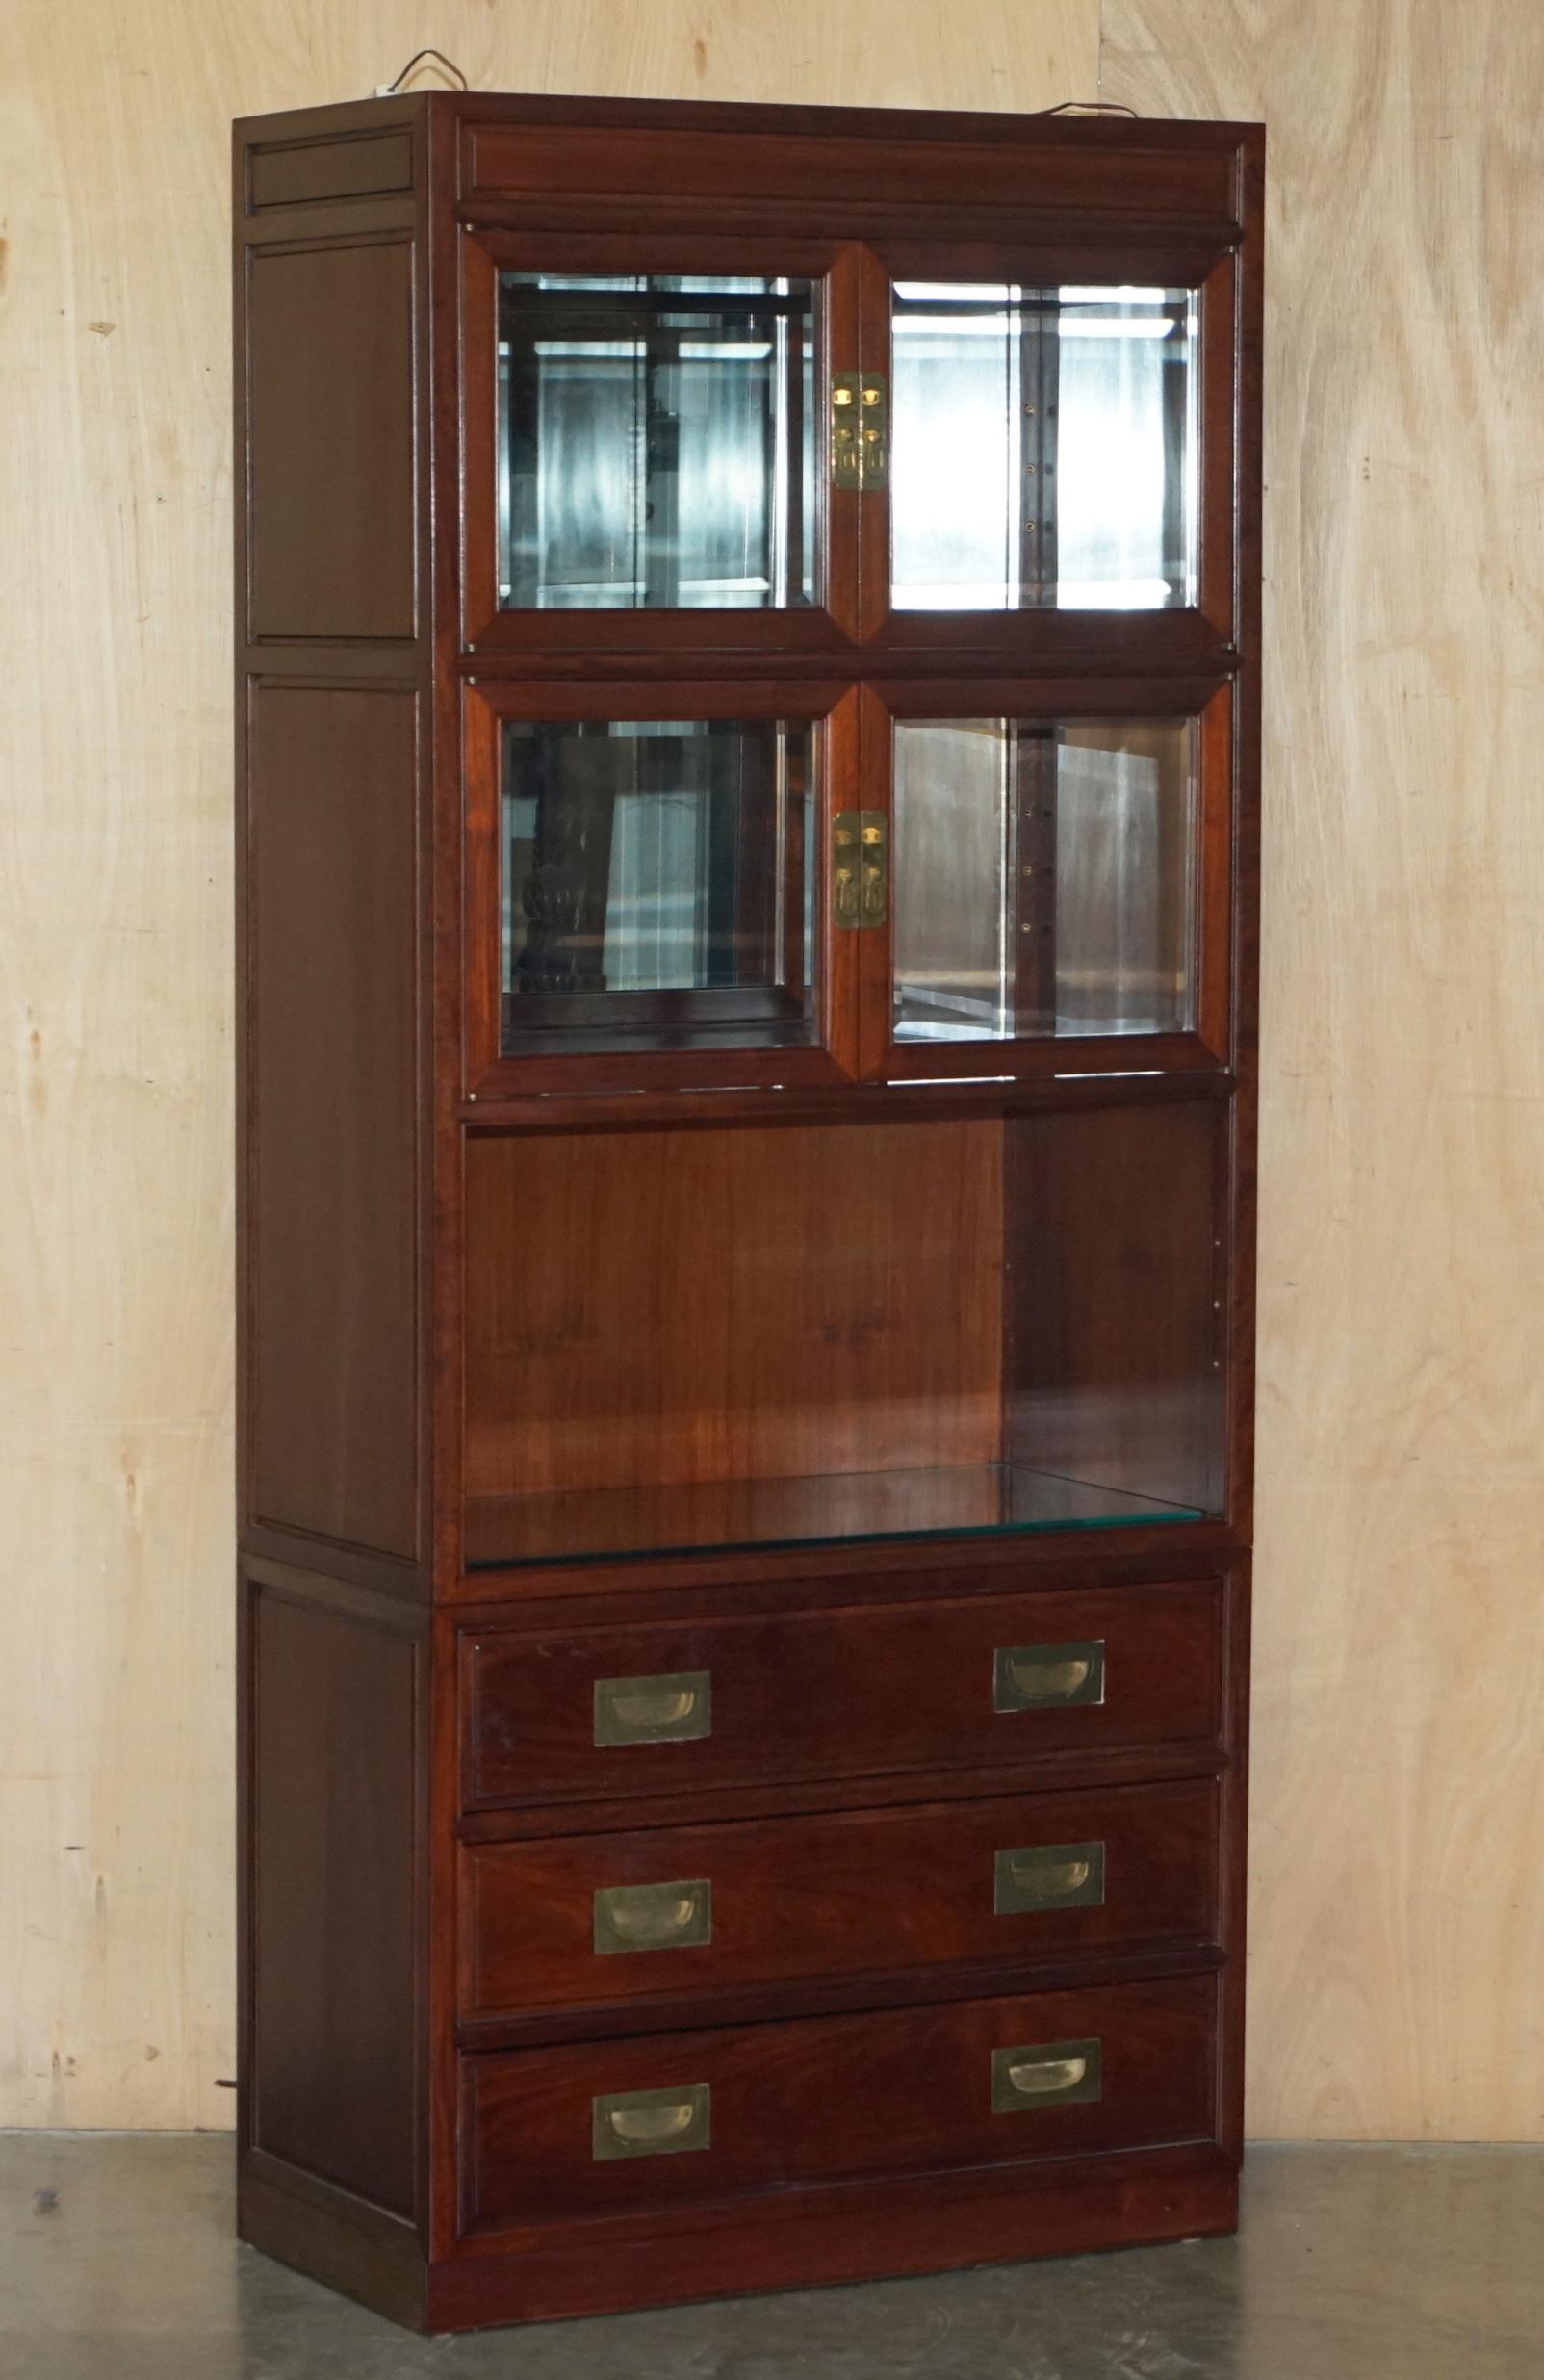 Royal House Antiques

Royal House Antiques is delighted to offer for sale this lovely suite of three, Chinese Rosewood, Military Campaign style bookcases with drawers than can be used as drinks cabinets 

Please note the delivery fee listed is just